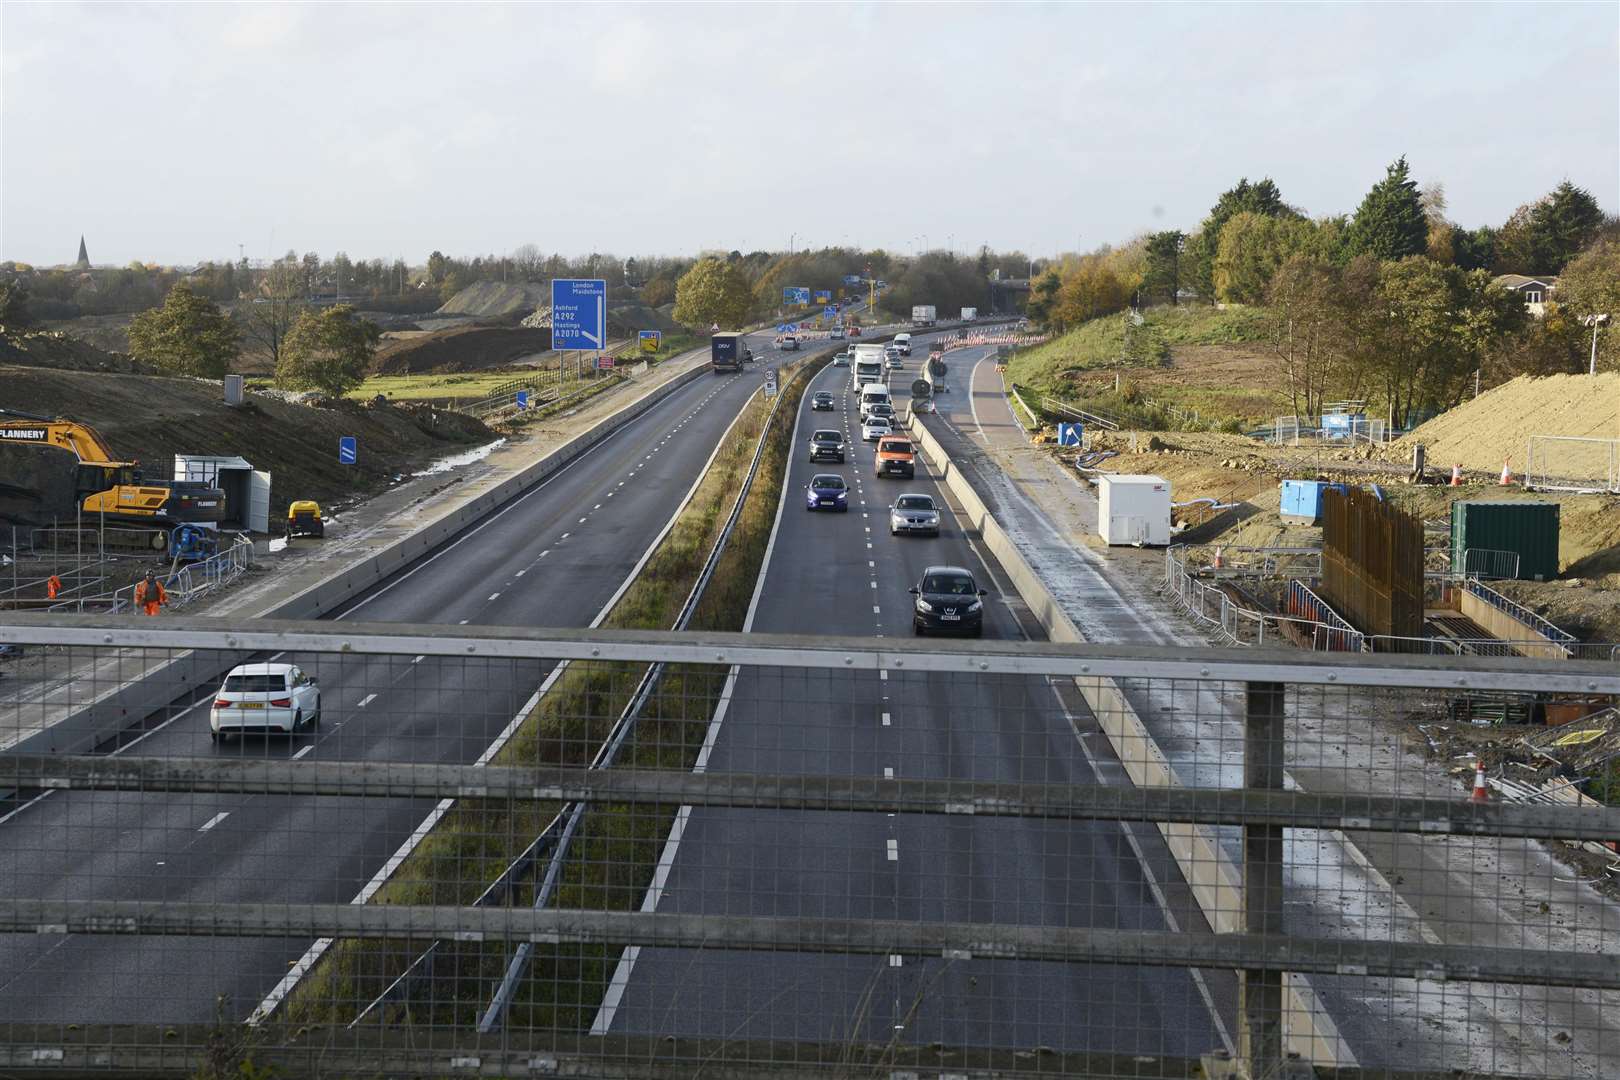 The motorway will close this weekend